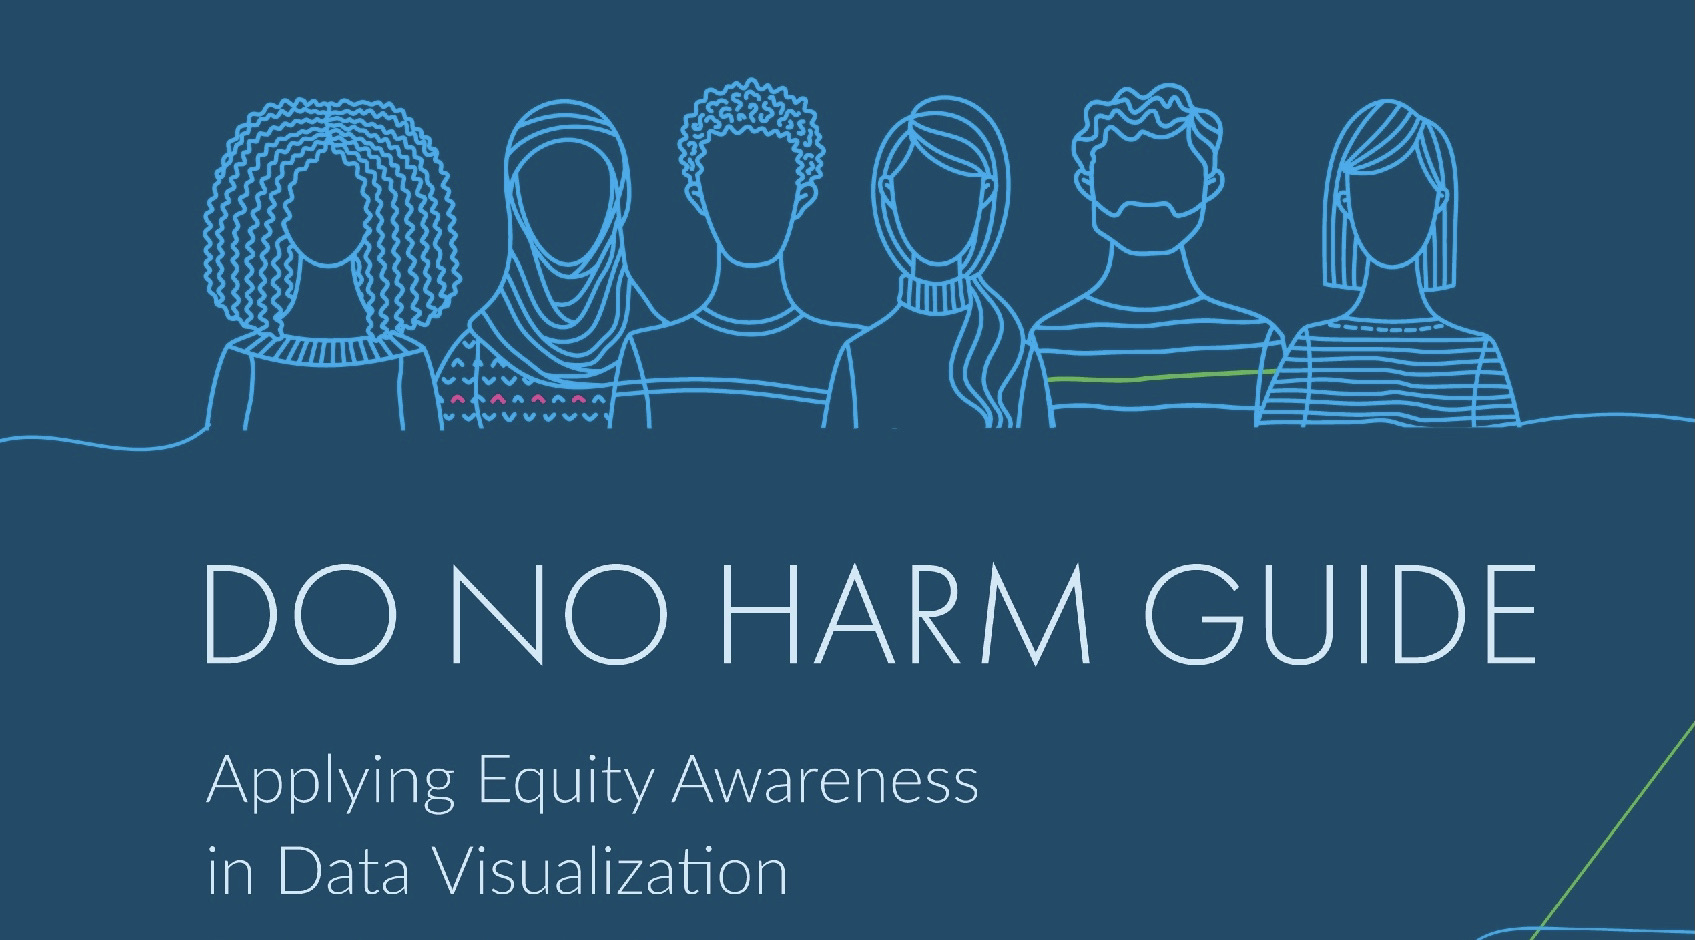 Graphic for Do No Harm Guide by Schwabish and Feng depicting abstract  figures